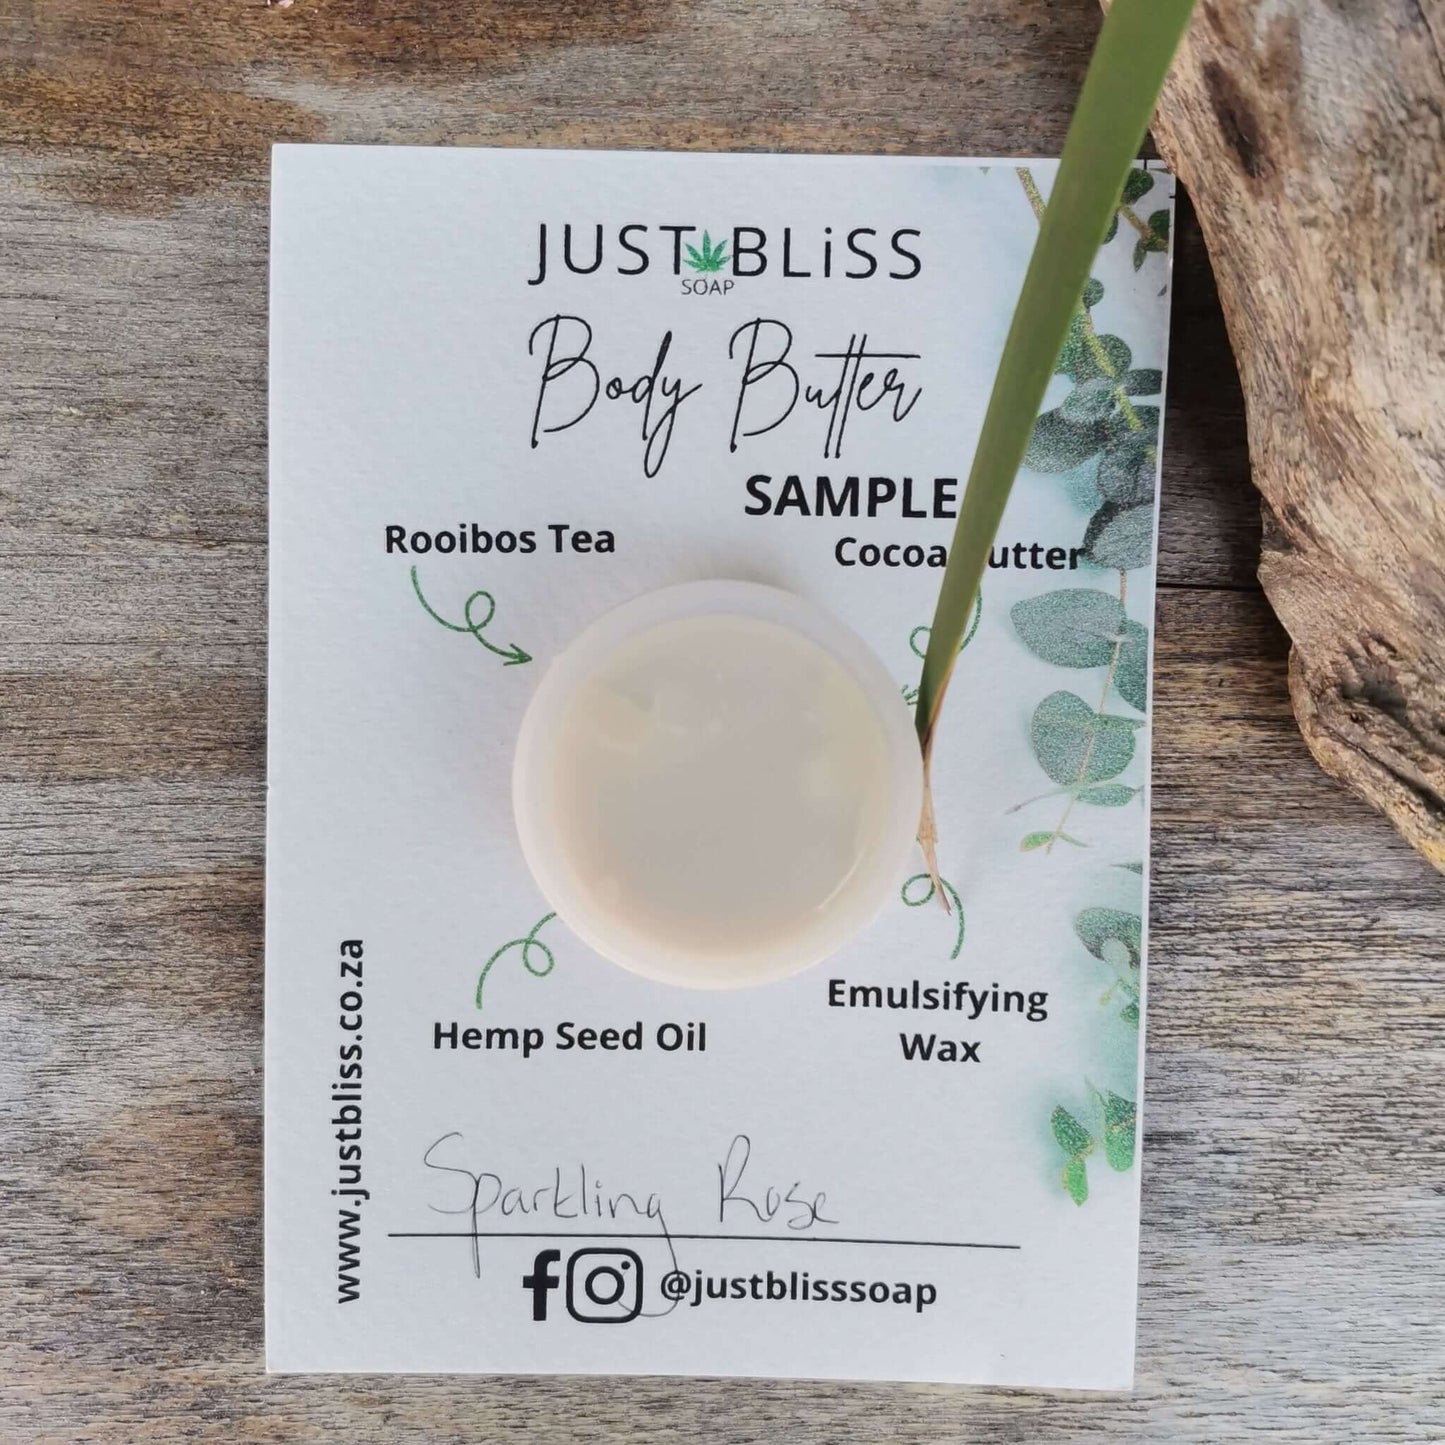 JUSTBLISS: Rooibos tea BODY BUTTER: Sample Sparkling rose - 10ml